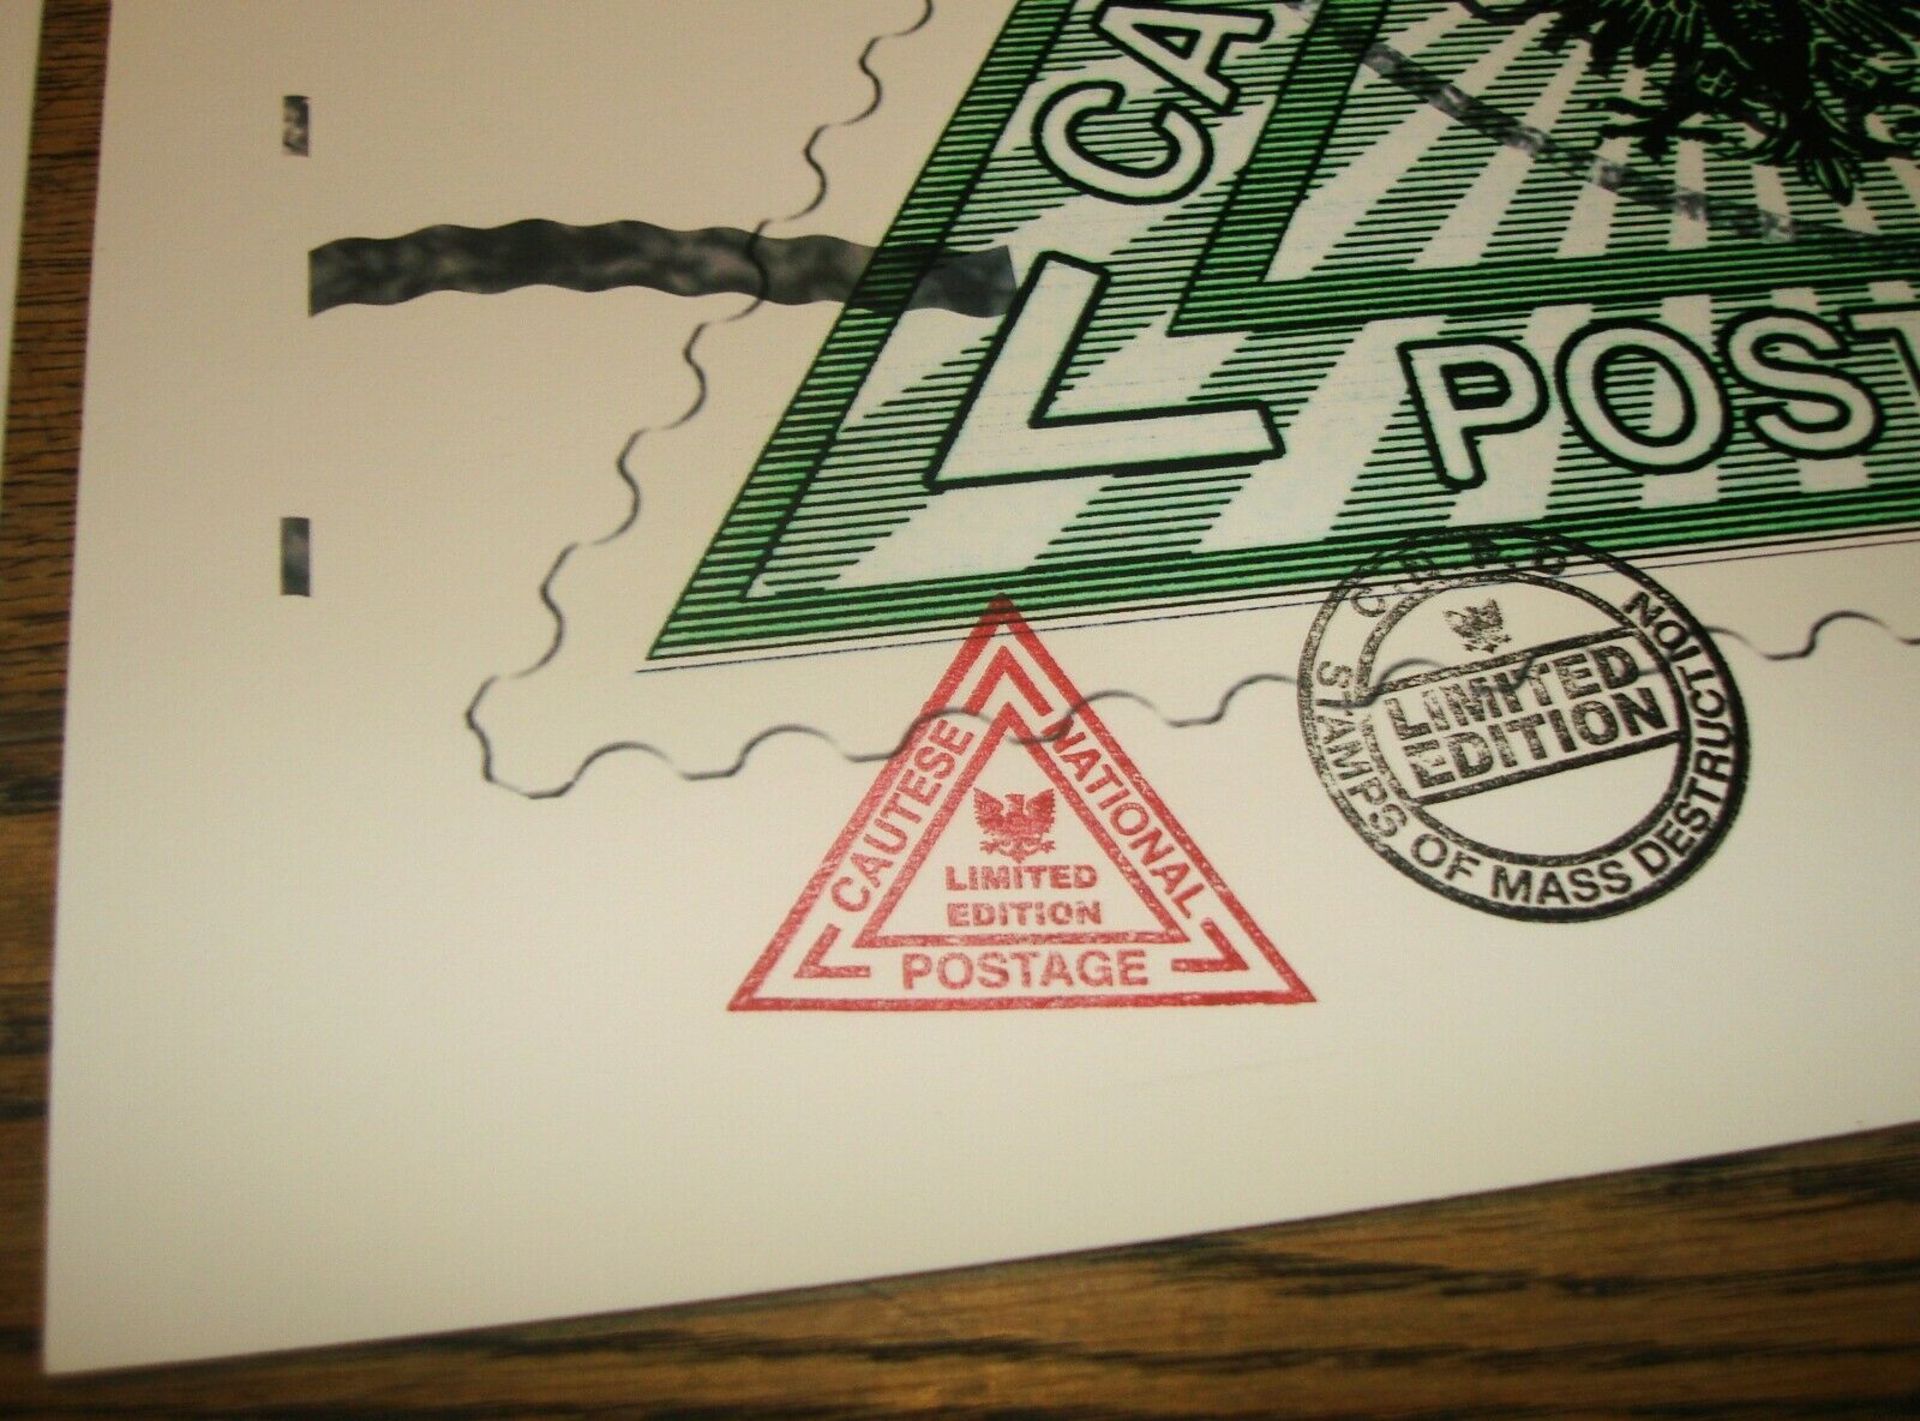 James Cauty (1956 - ) CNPD £2, £3 and £4 Triangle Stamps - Set of 3 Pop Editions COA (2005) - Image 8 of 13